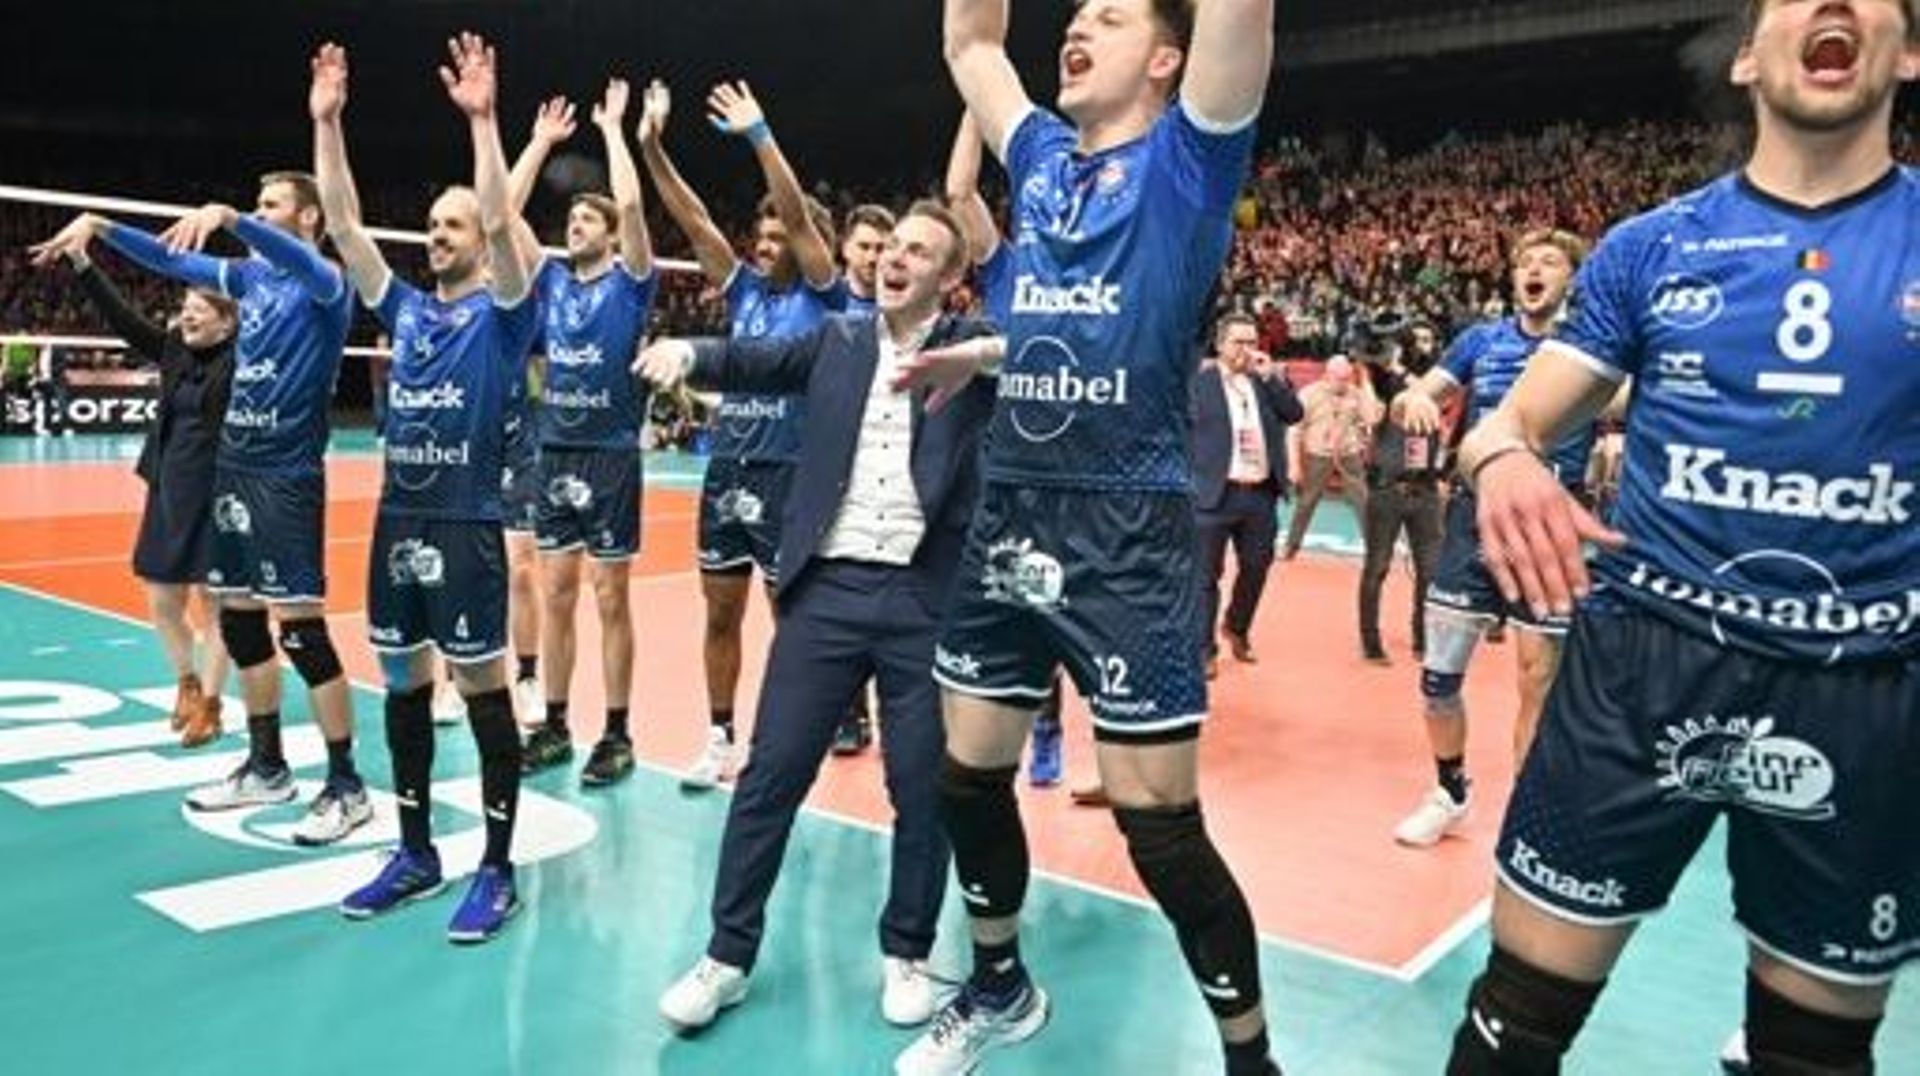 Roeselare's players and Roeselare's head coach Steven Vanmedegael celebrate after winning the match between Knack Volley Roeselare and Decospan Volley Team Menen, the final match in the men Belgian volleyball cup competition, Sunday 26 February 2023 in Me